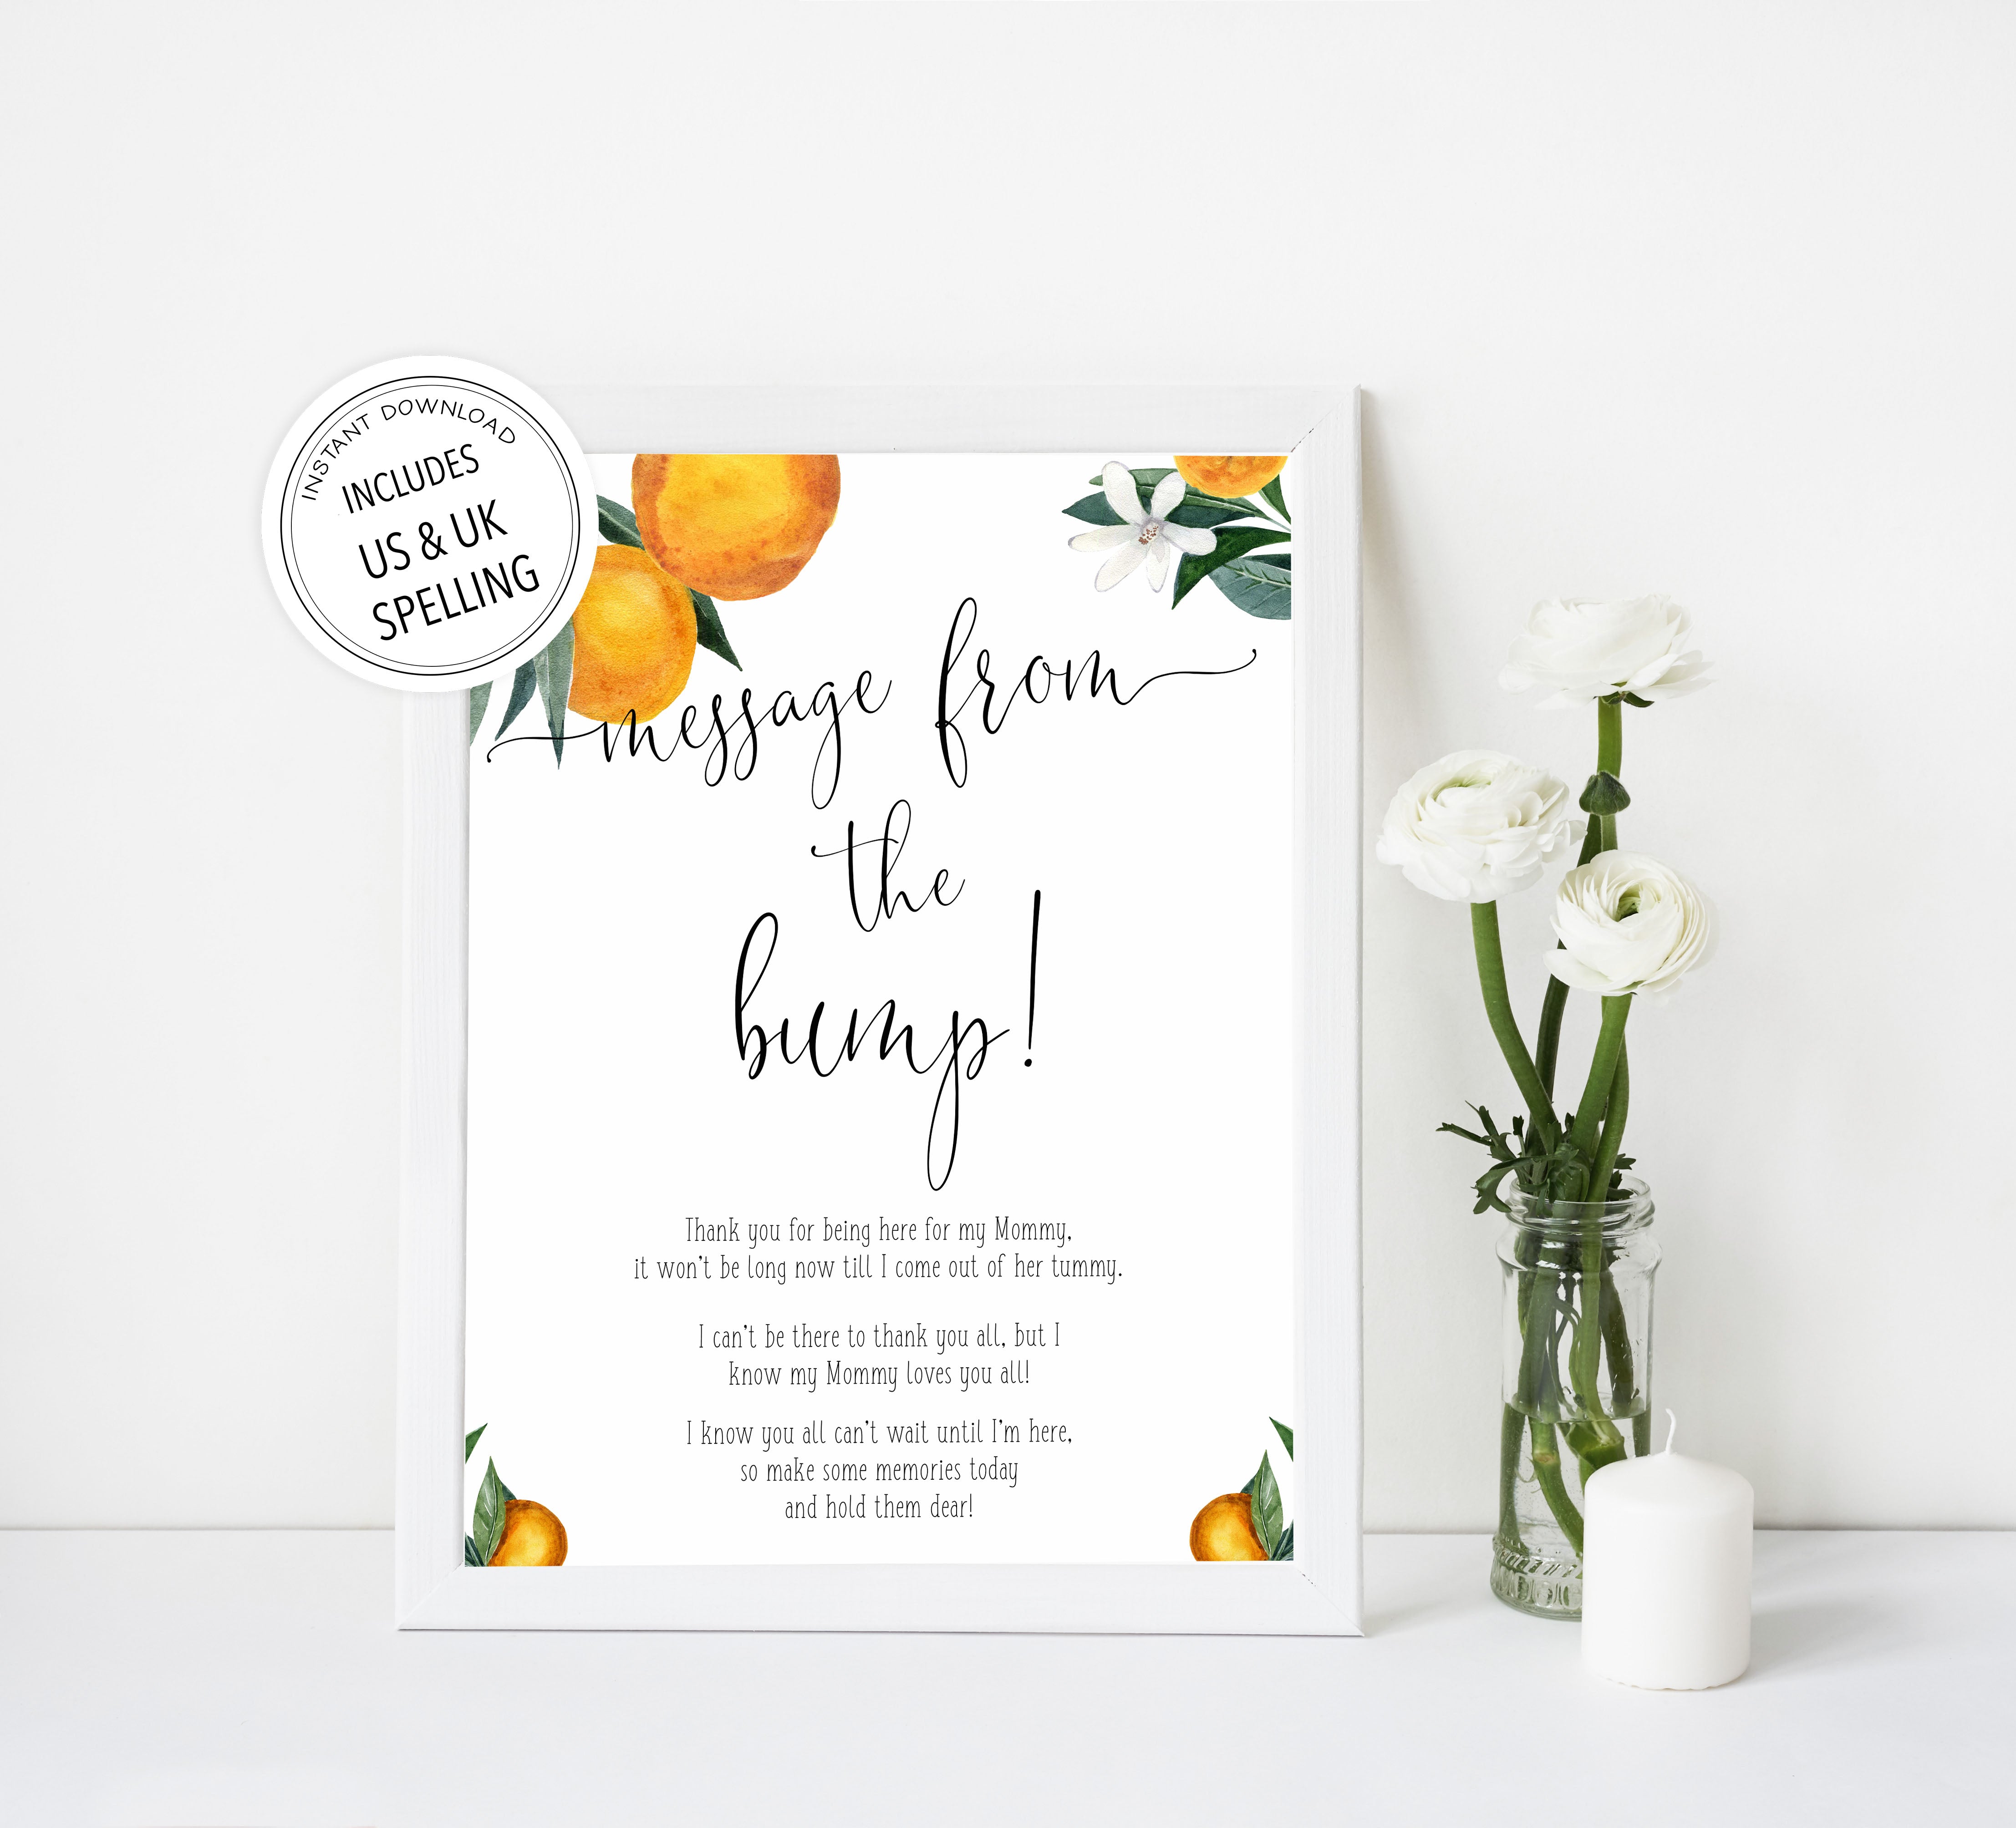 message from the bump game, Printable baby shower games, little cutie baby games, baby shower games, fun baby shower ideas, top baby shower ideas, little cutie baby shower, baby shower games, fun little cutie baby shower ideas, citrus baby shower games, citrus baby shower, orange baby shower